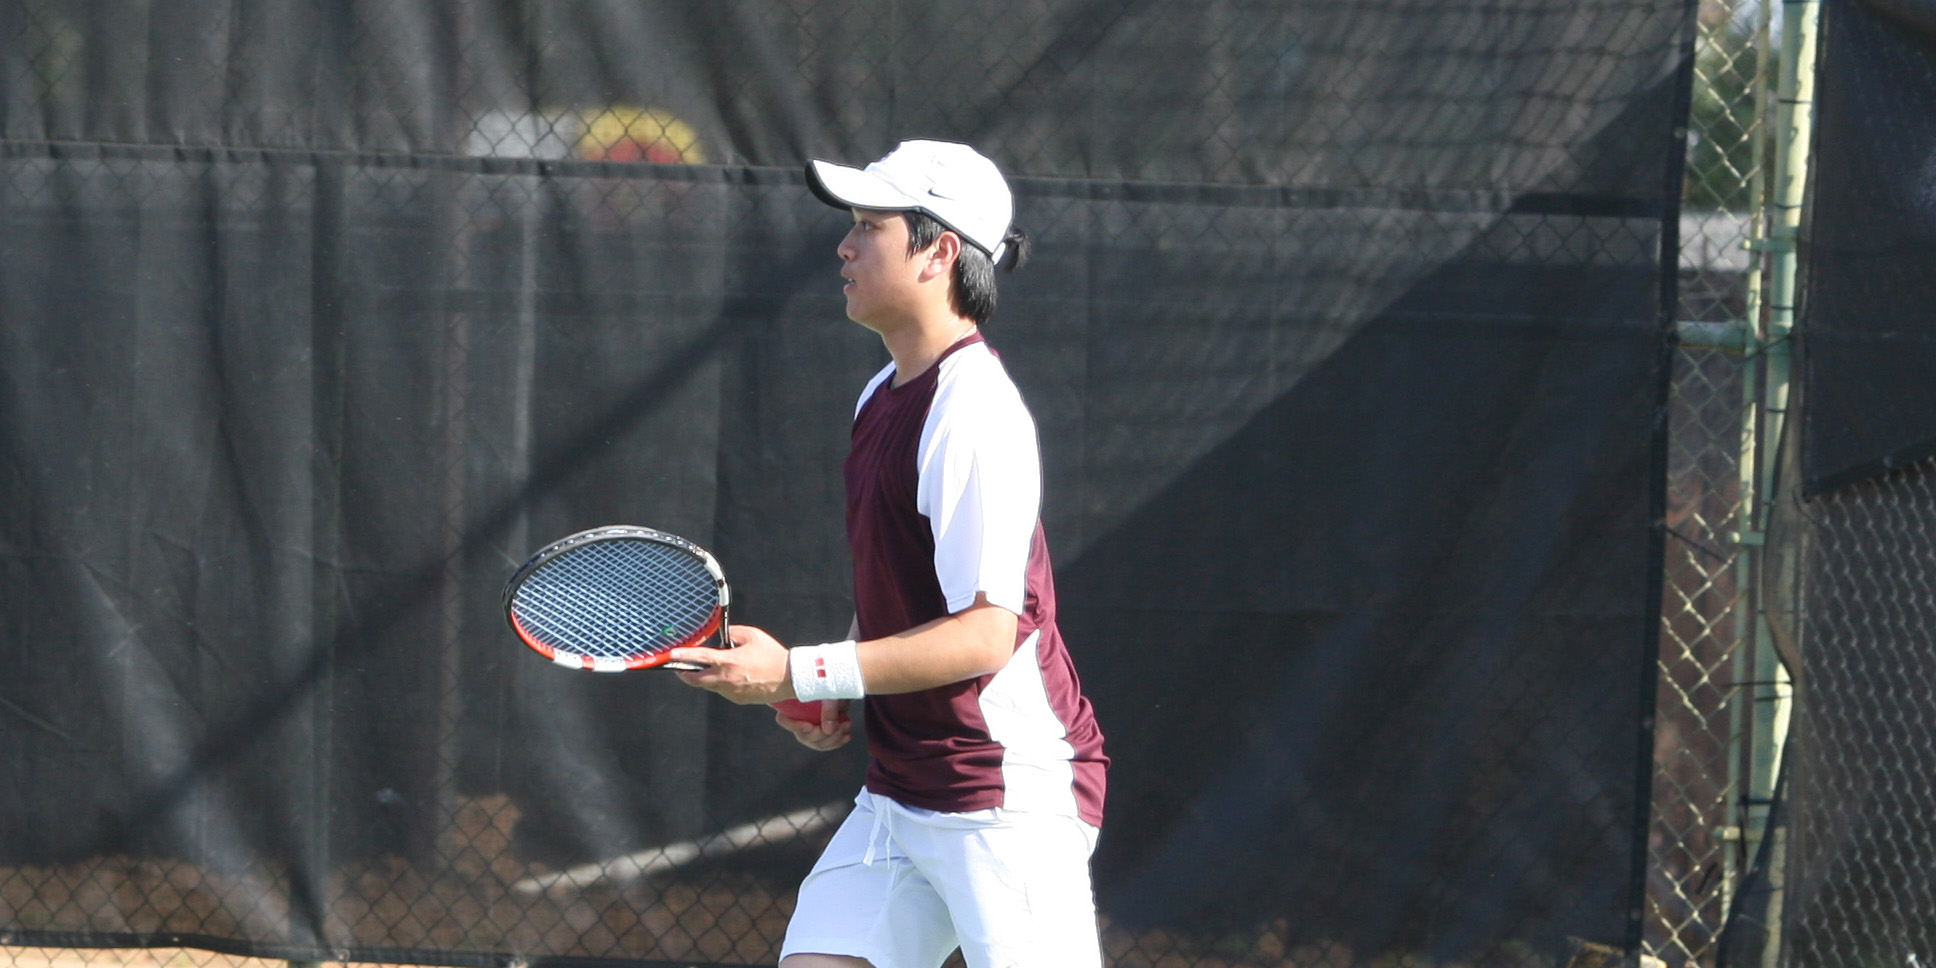 Centenary Tennis Teams To Face LeTourneau On Saturday On Road